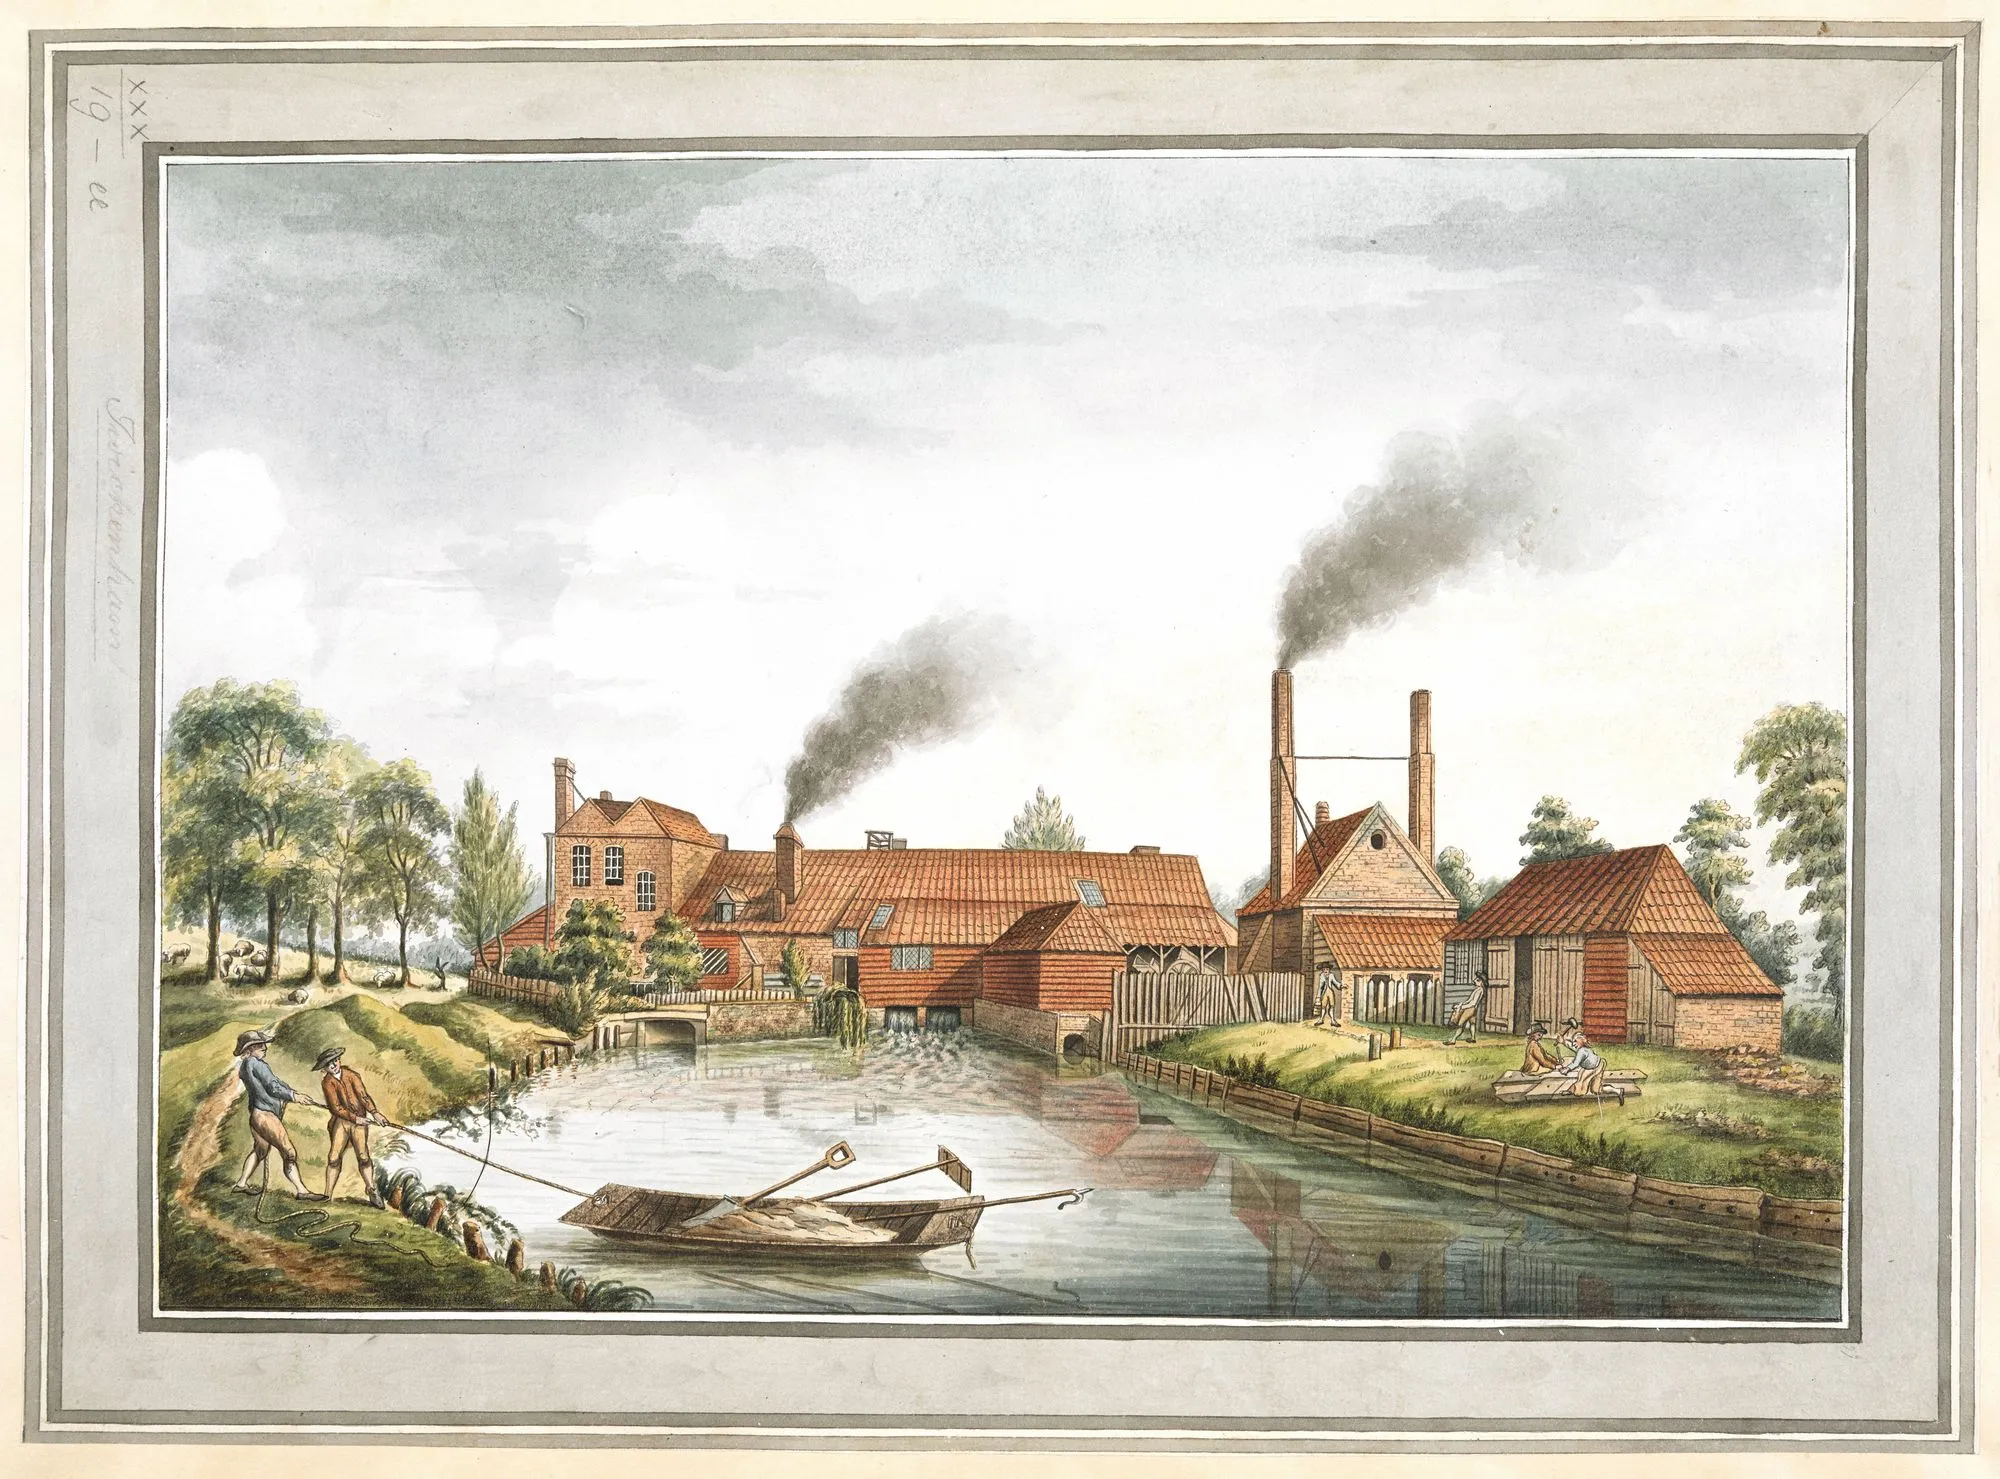 Anonyme, A drawn View of the Copper Mills on Twickenham Common, 1795, dessin, 31,5 x 43,5 cm, British Library, Londres